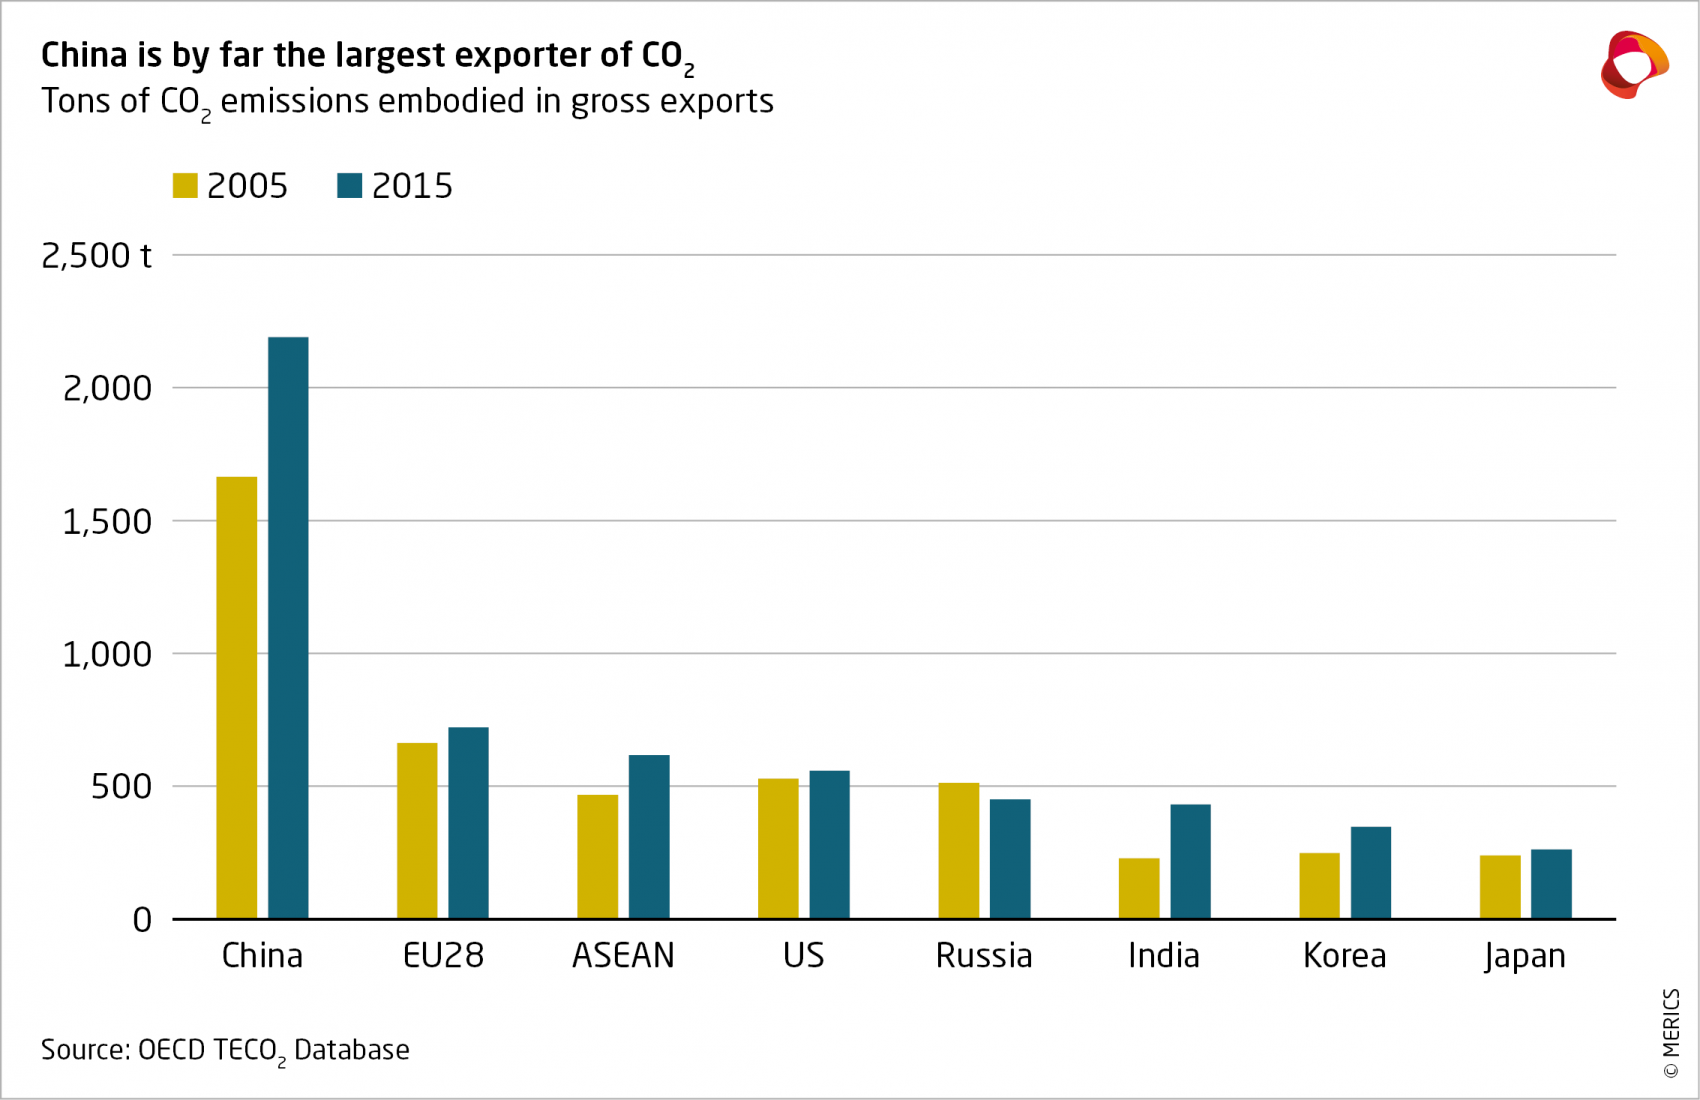 Tons of C02 emissions embodied in gross exports